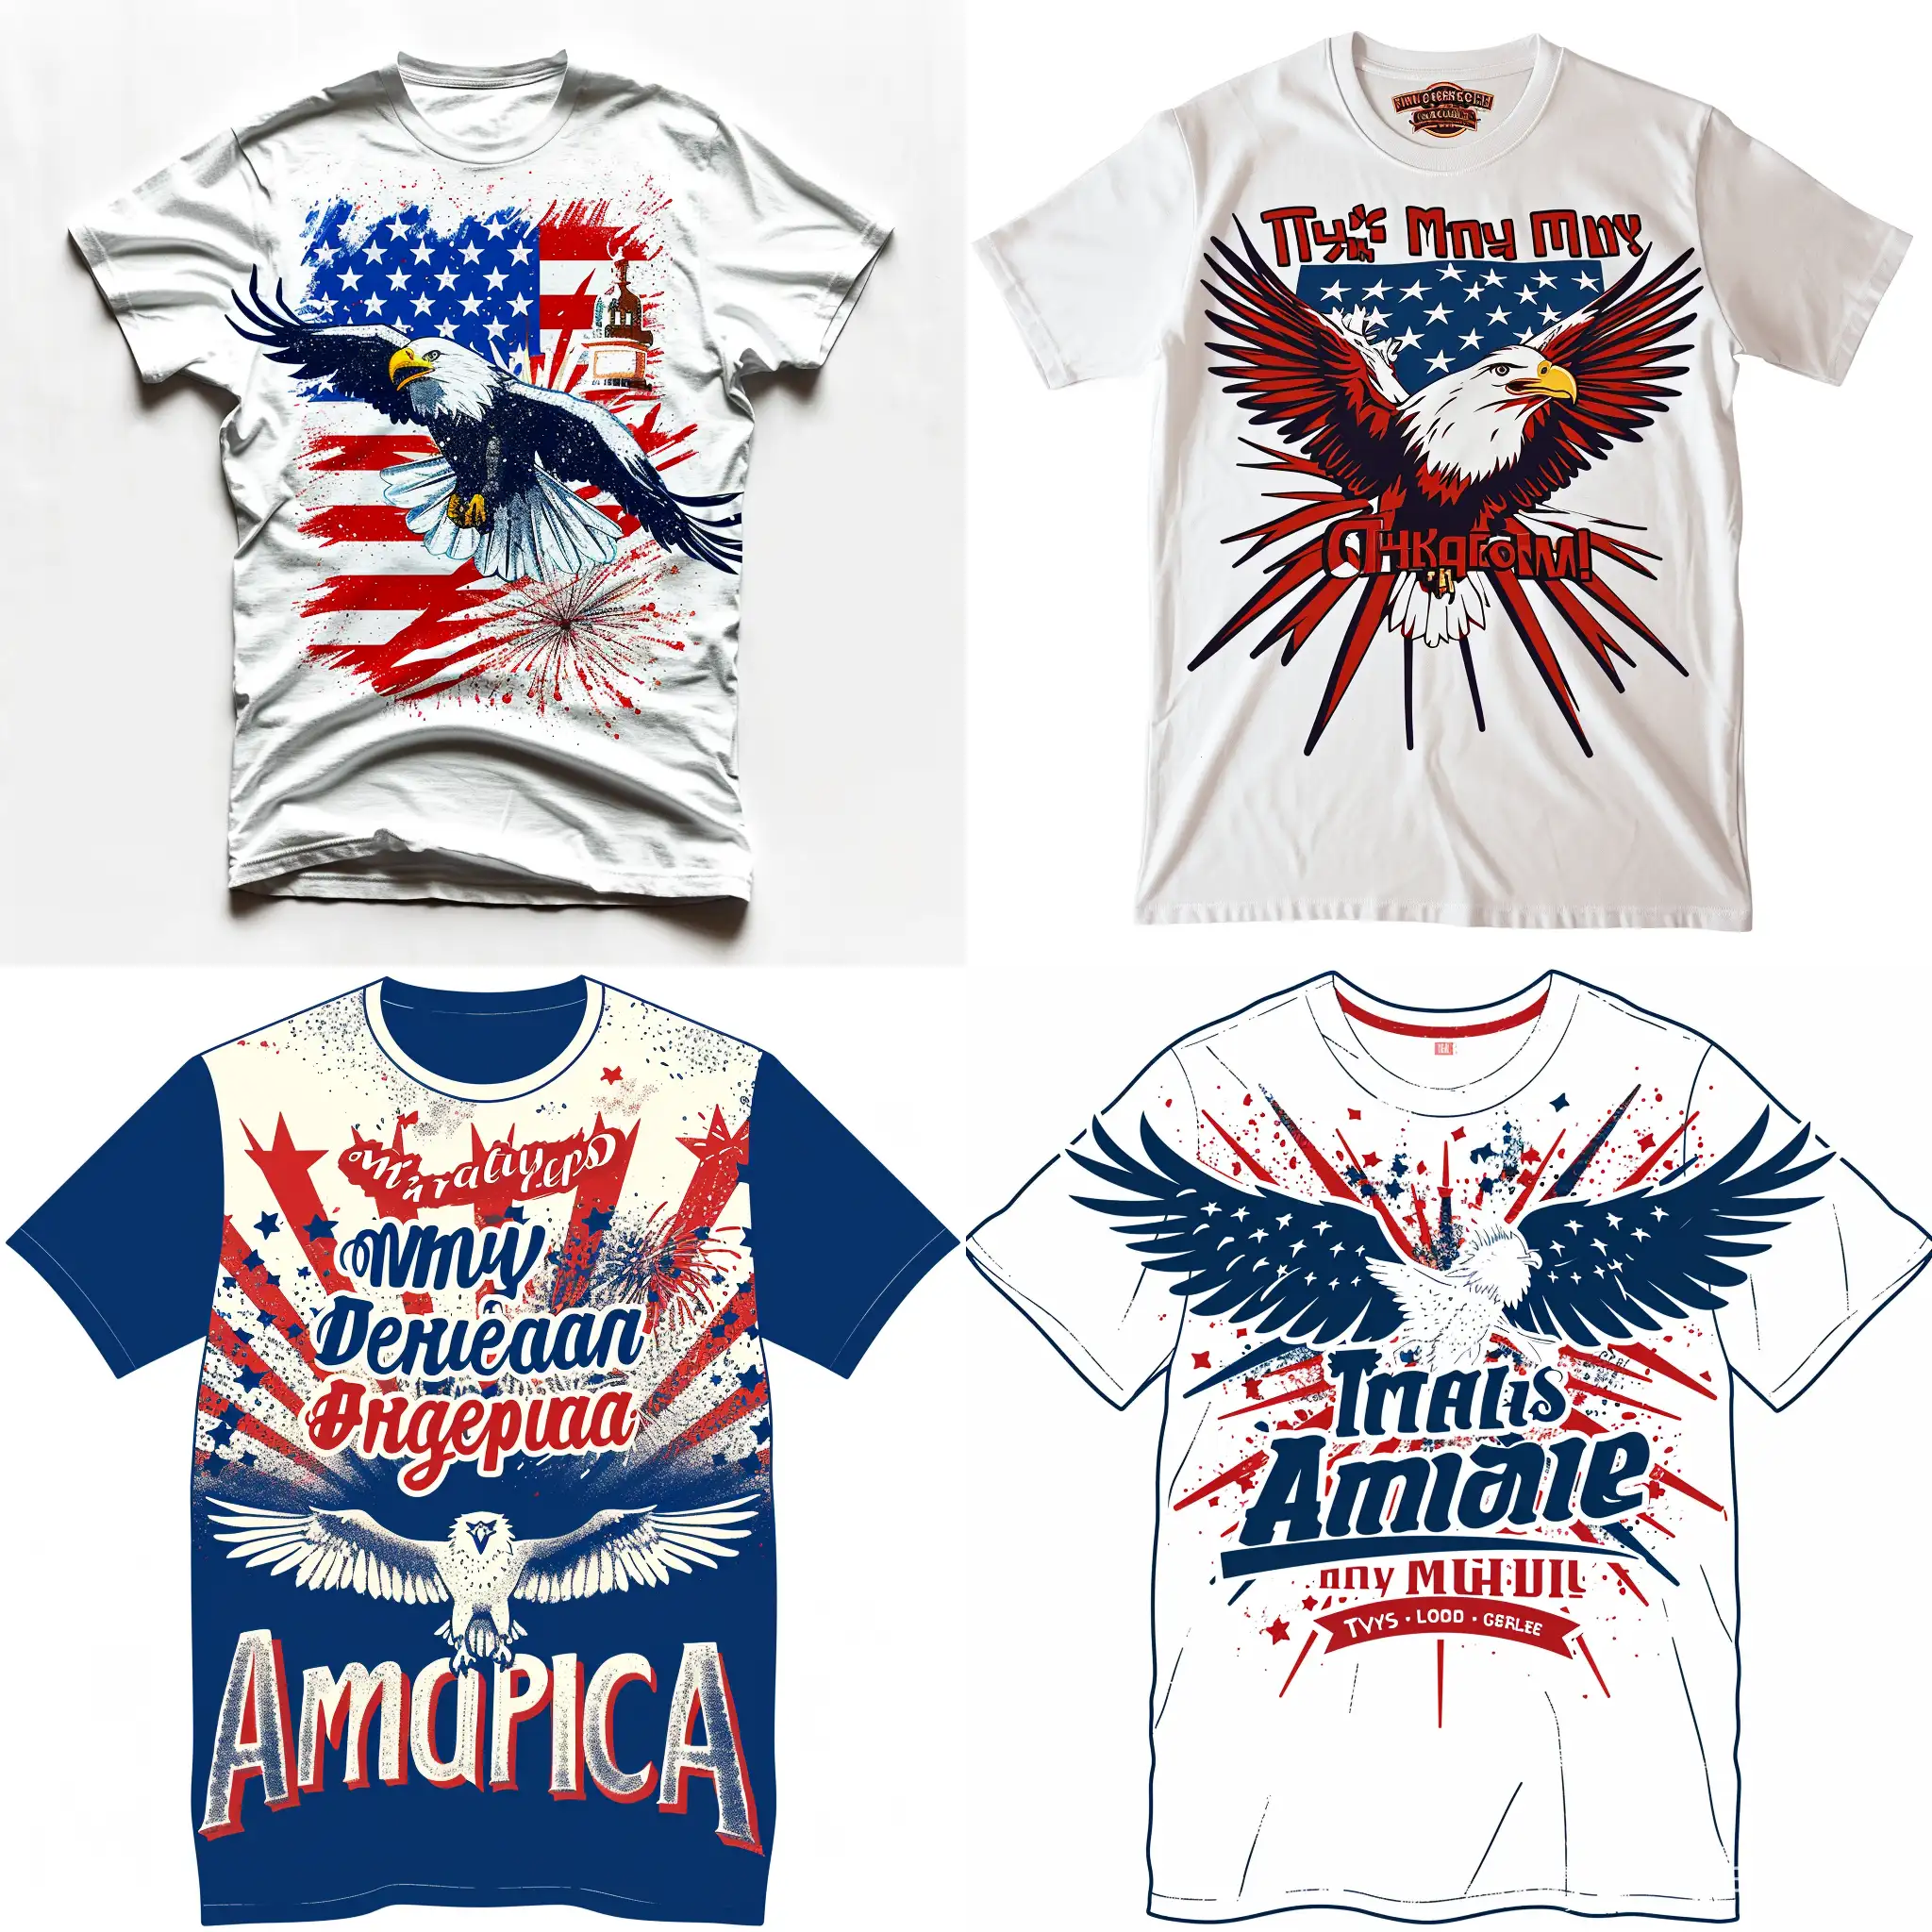 Action: Generate a t-shirt to ensures that the t-shirt design is patriotic, respectful, and appealing, capturing the essence of American pride in a wearable form. 

Patriotic Slogan: Eagles Soaring, Fireworks Roaring – That's My America!

Color Scheme: Stick to the traditional colors of the American flag: red, white, and blue. 

Typography: Select a font that is bold and legible, possibly with a traditional touch. Ensure the font complements the overall design without overpowering it. The text should be easily readable from a distance. Experiment with fonts and placements to ensure your message stands out. 

Additional Graphics: Subtly include other patriotic symbols like a silhouette of the Bald Eagle or a small Liberty Bell. Place these additional elements in a way that supports the main design.

Humor and Puns: Use Funny or clever puns that can be effective, especially they resonate with a targeted audience.

Background: Pure white background.